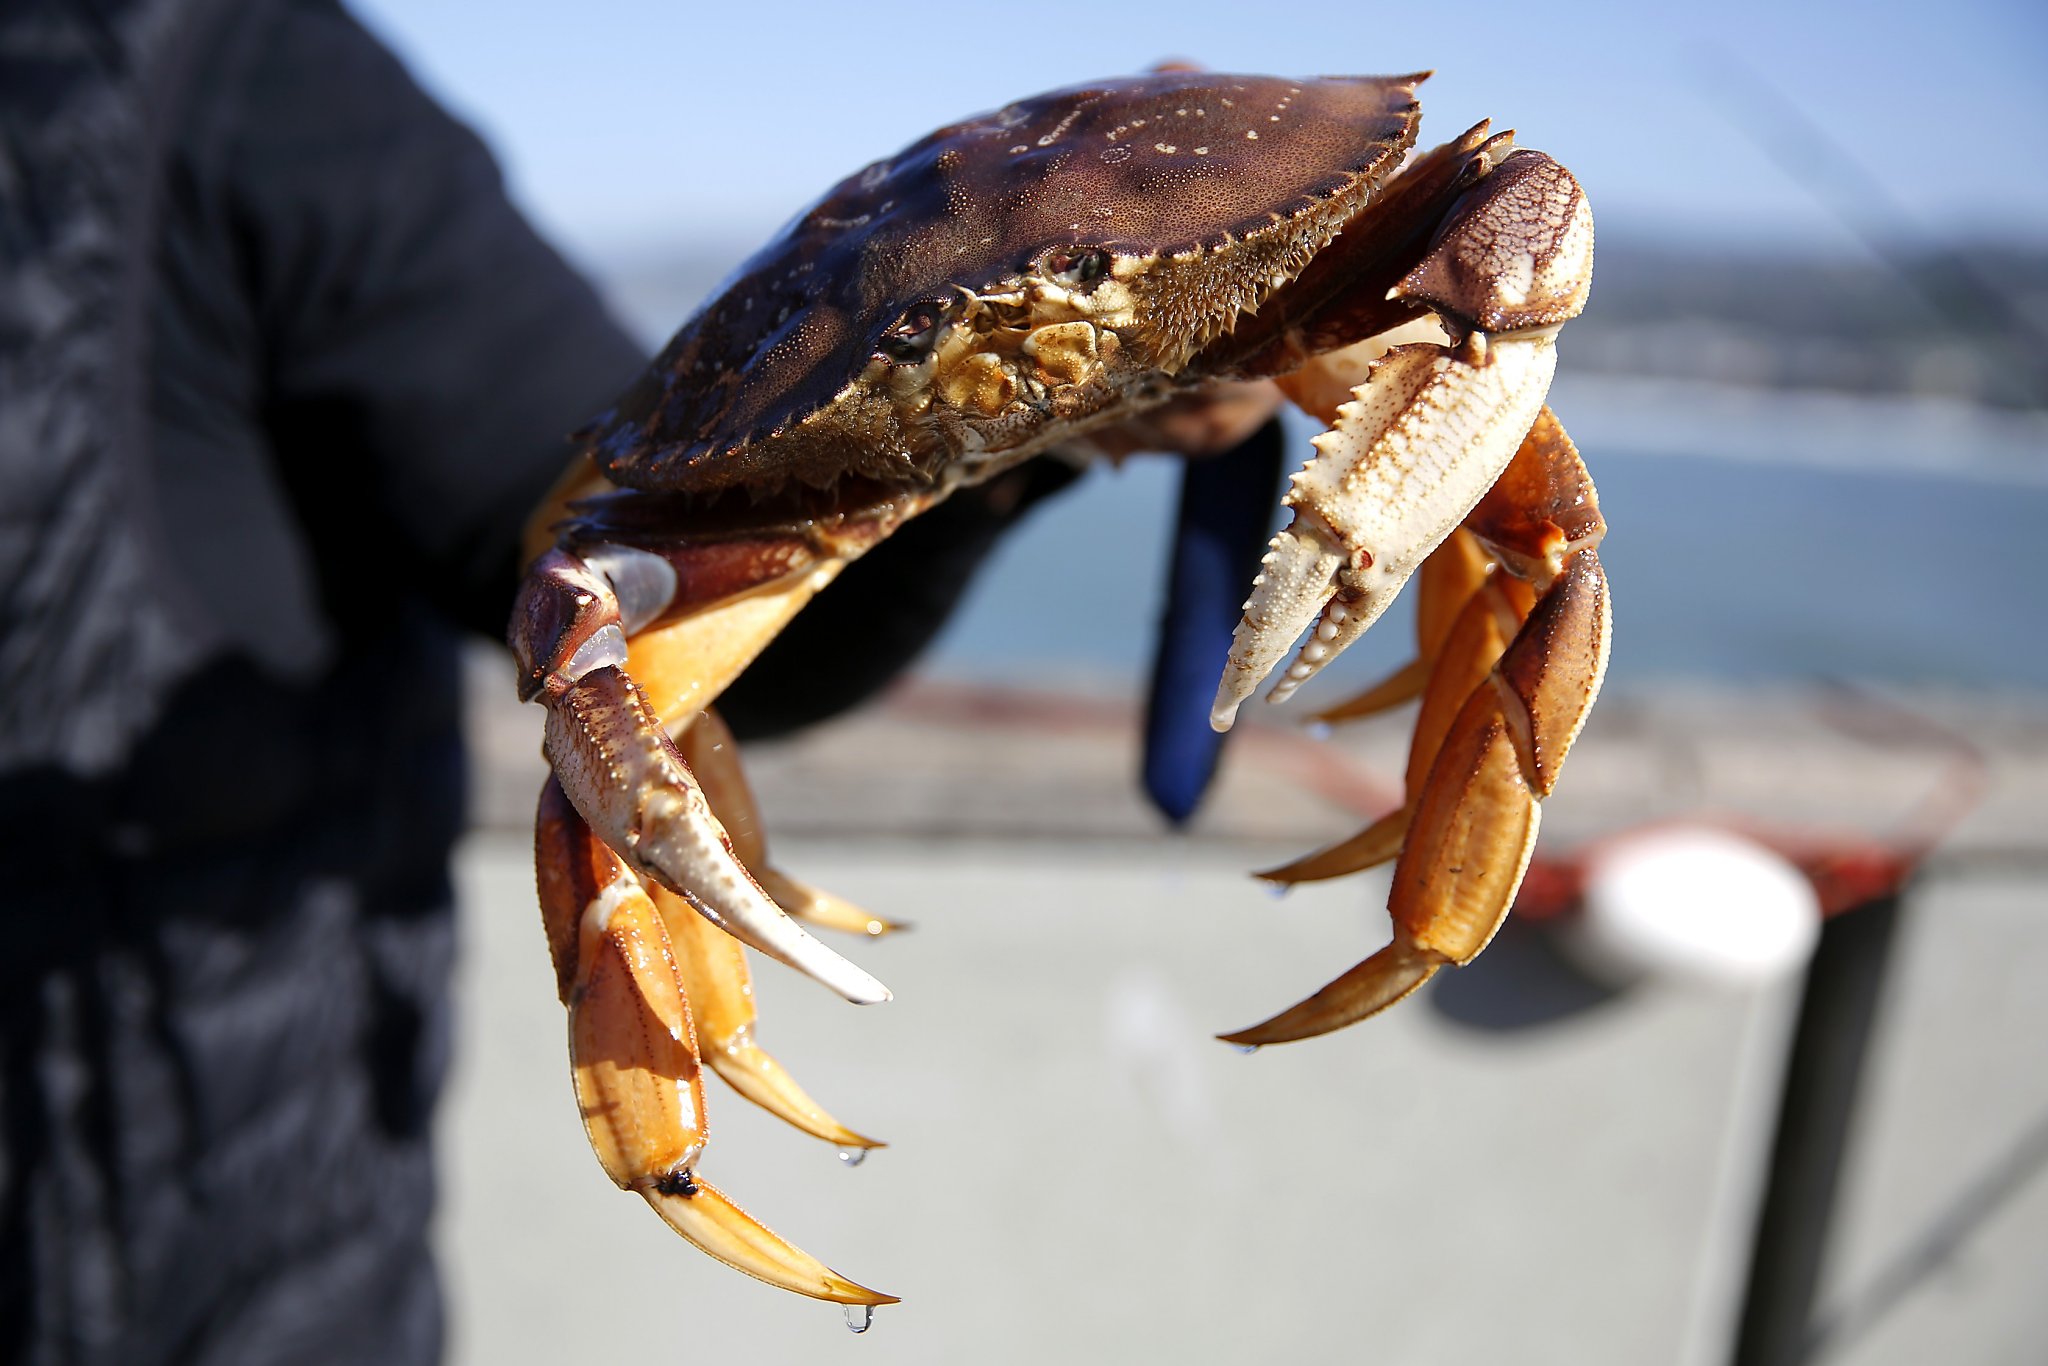 The only way to get local Dungeness crab? Catch them yourself